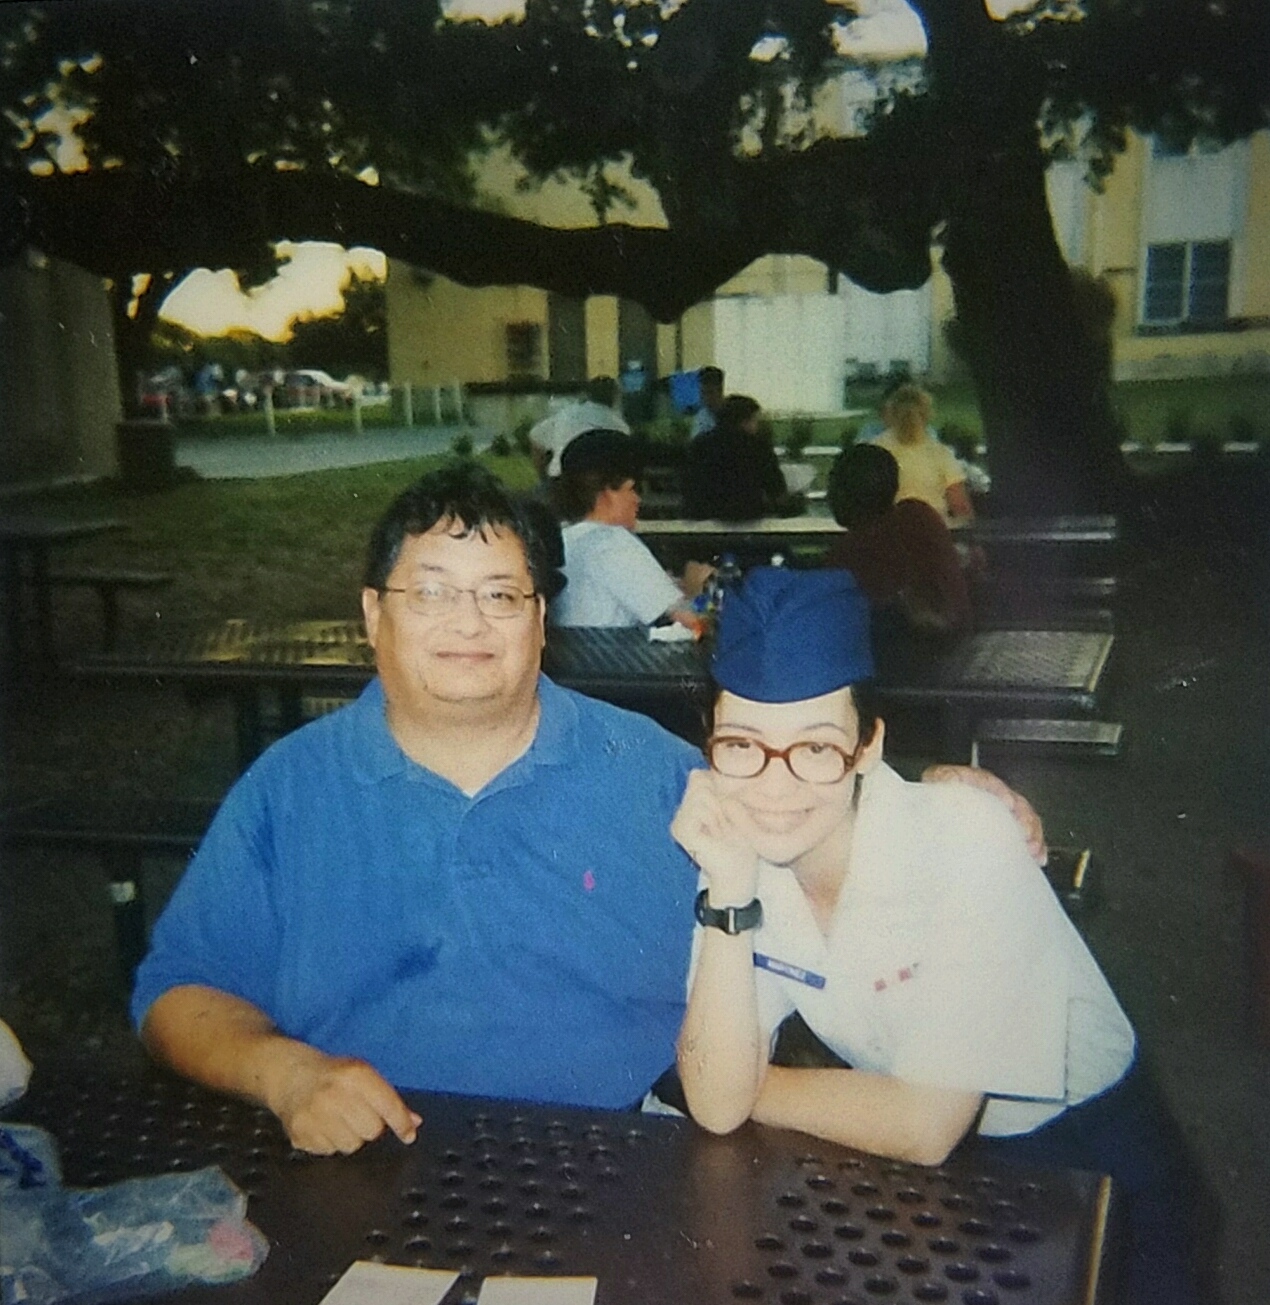 PHOTO: Photo of an older man and a young woman embracing each other while sitting at a table in courtyard. The older man is wearing a blue polo shirt, and the young woman is wearing Air Force blues. Photo courtesy of The Signal reporter Jennifer Martinez.